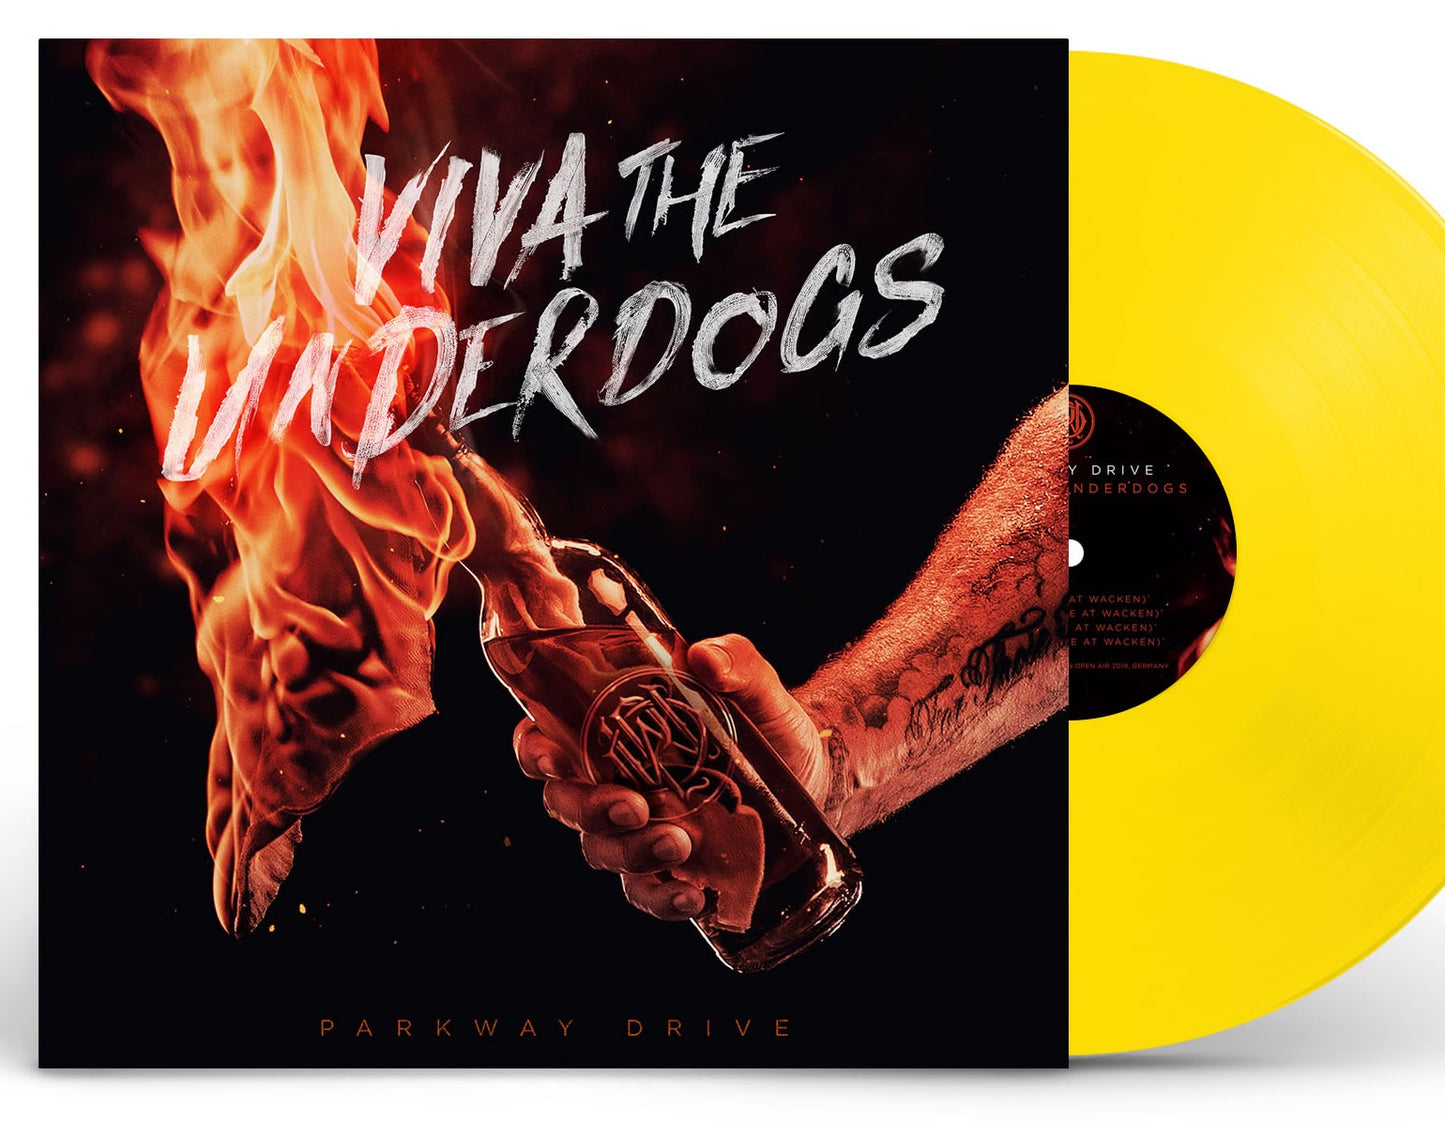 NEW - Parkway Drive, Viva The Underdogs Yellow 2LP